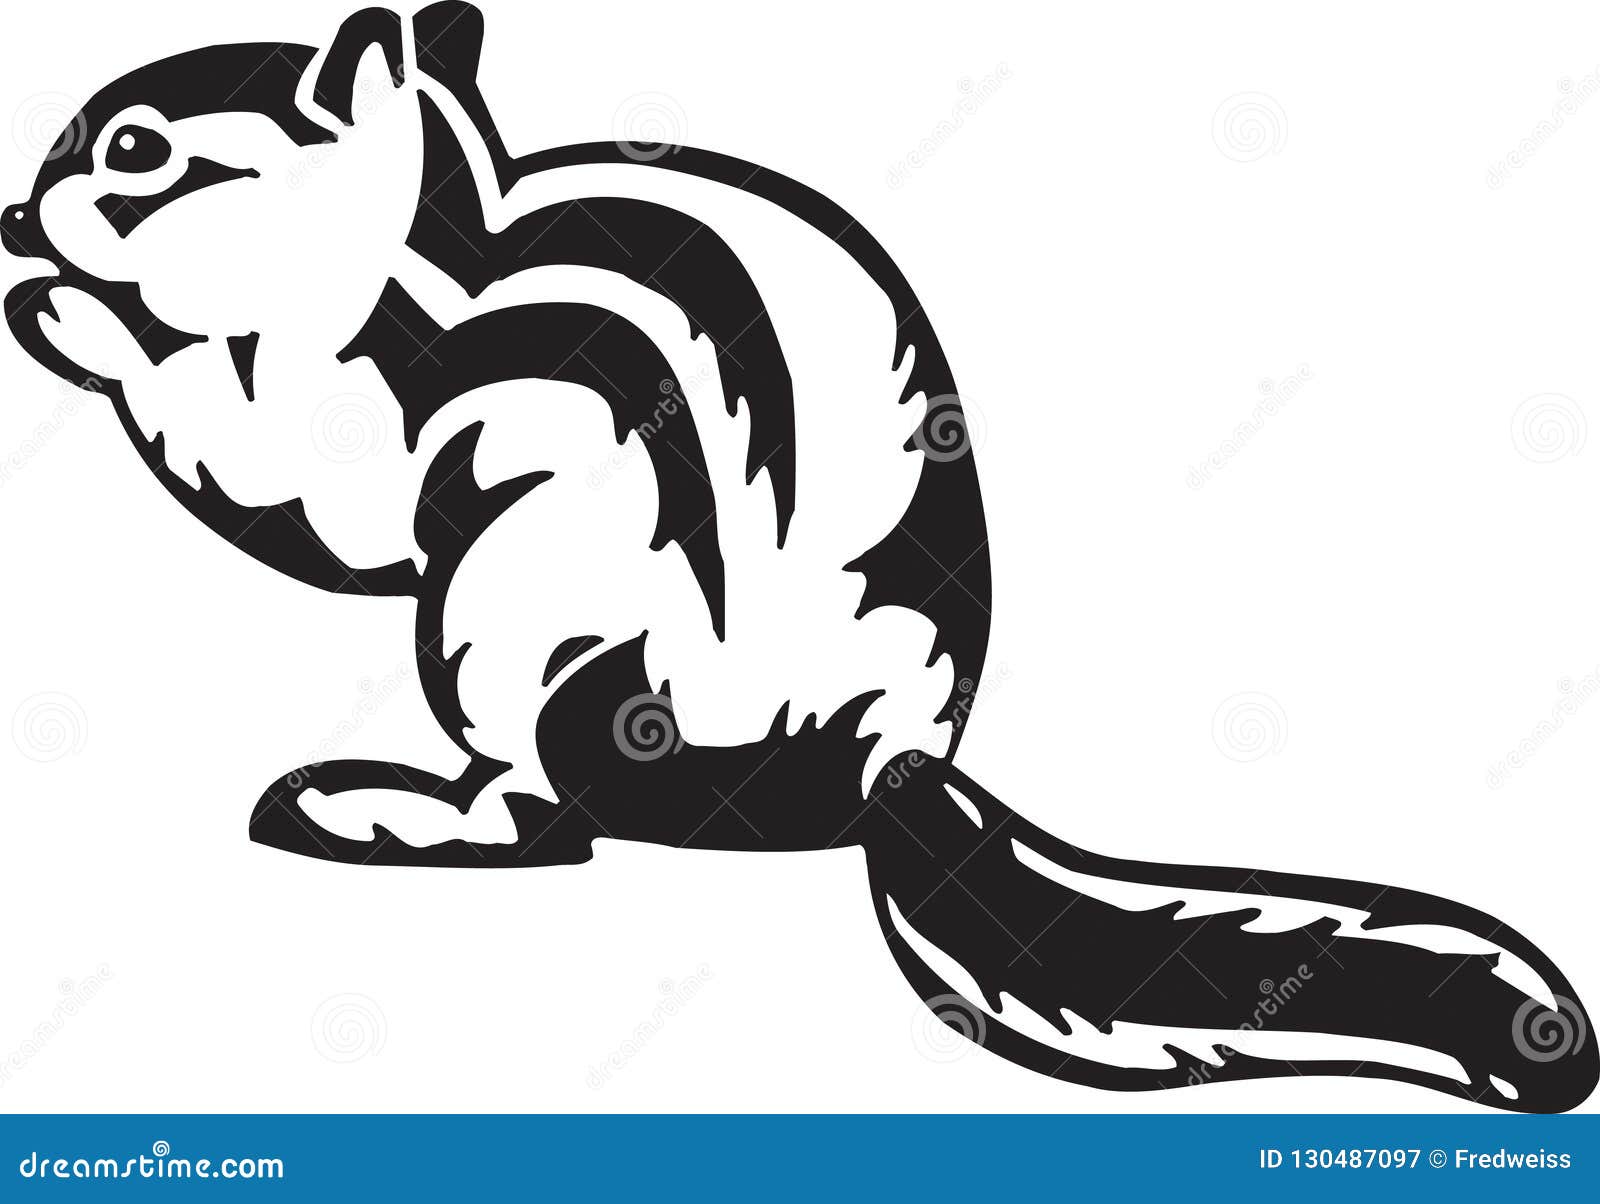 Featured image of post Cute Chipmunk Clipart Black And White Download high quality black white clip art from our collection of 41 940 205 clip art graphics